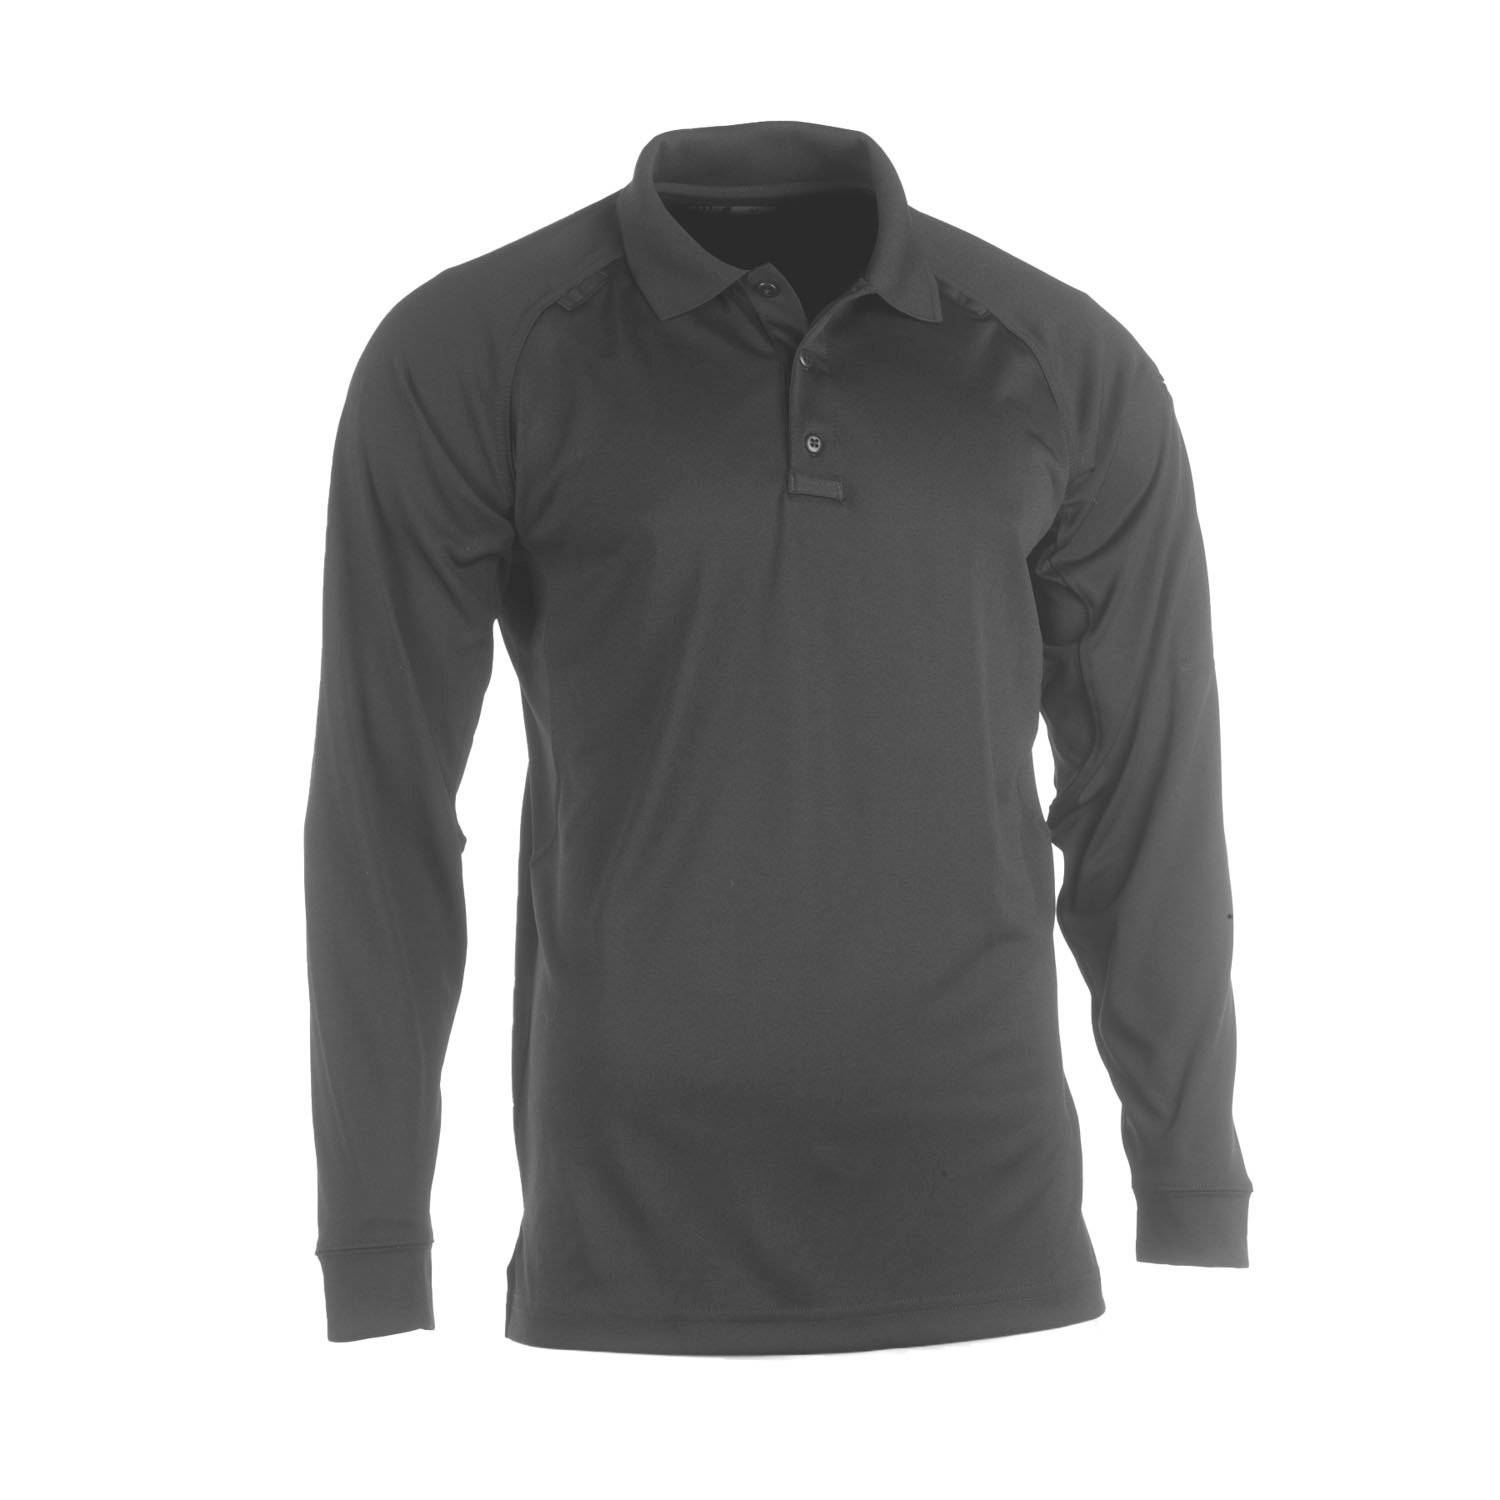 5.11 TACTICAL MEN'S SNAG-FREE PERFORMANCE LONG SLEEVE POLO